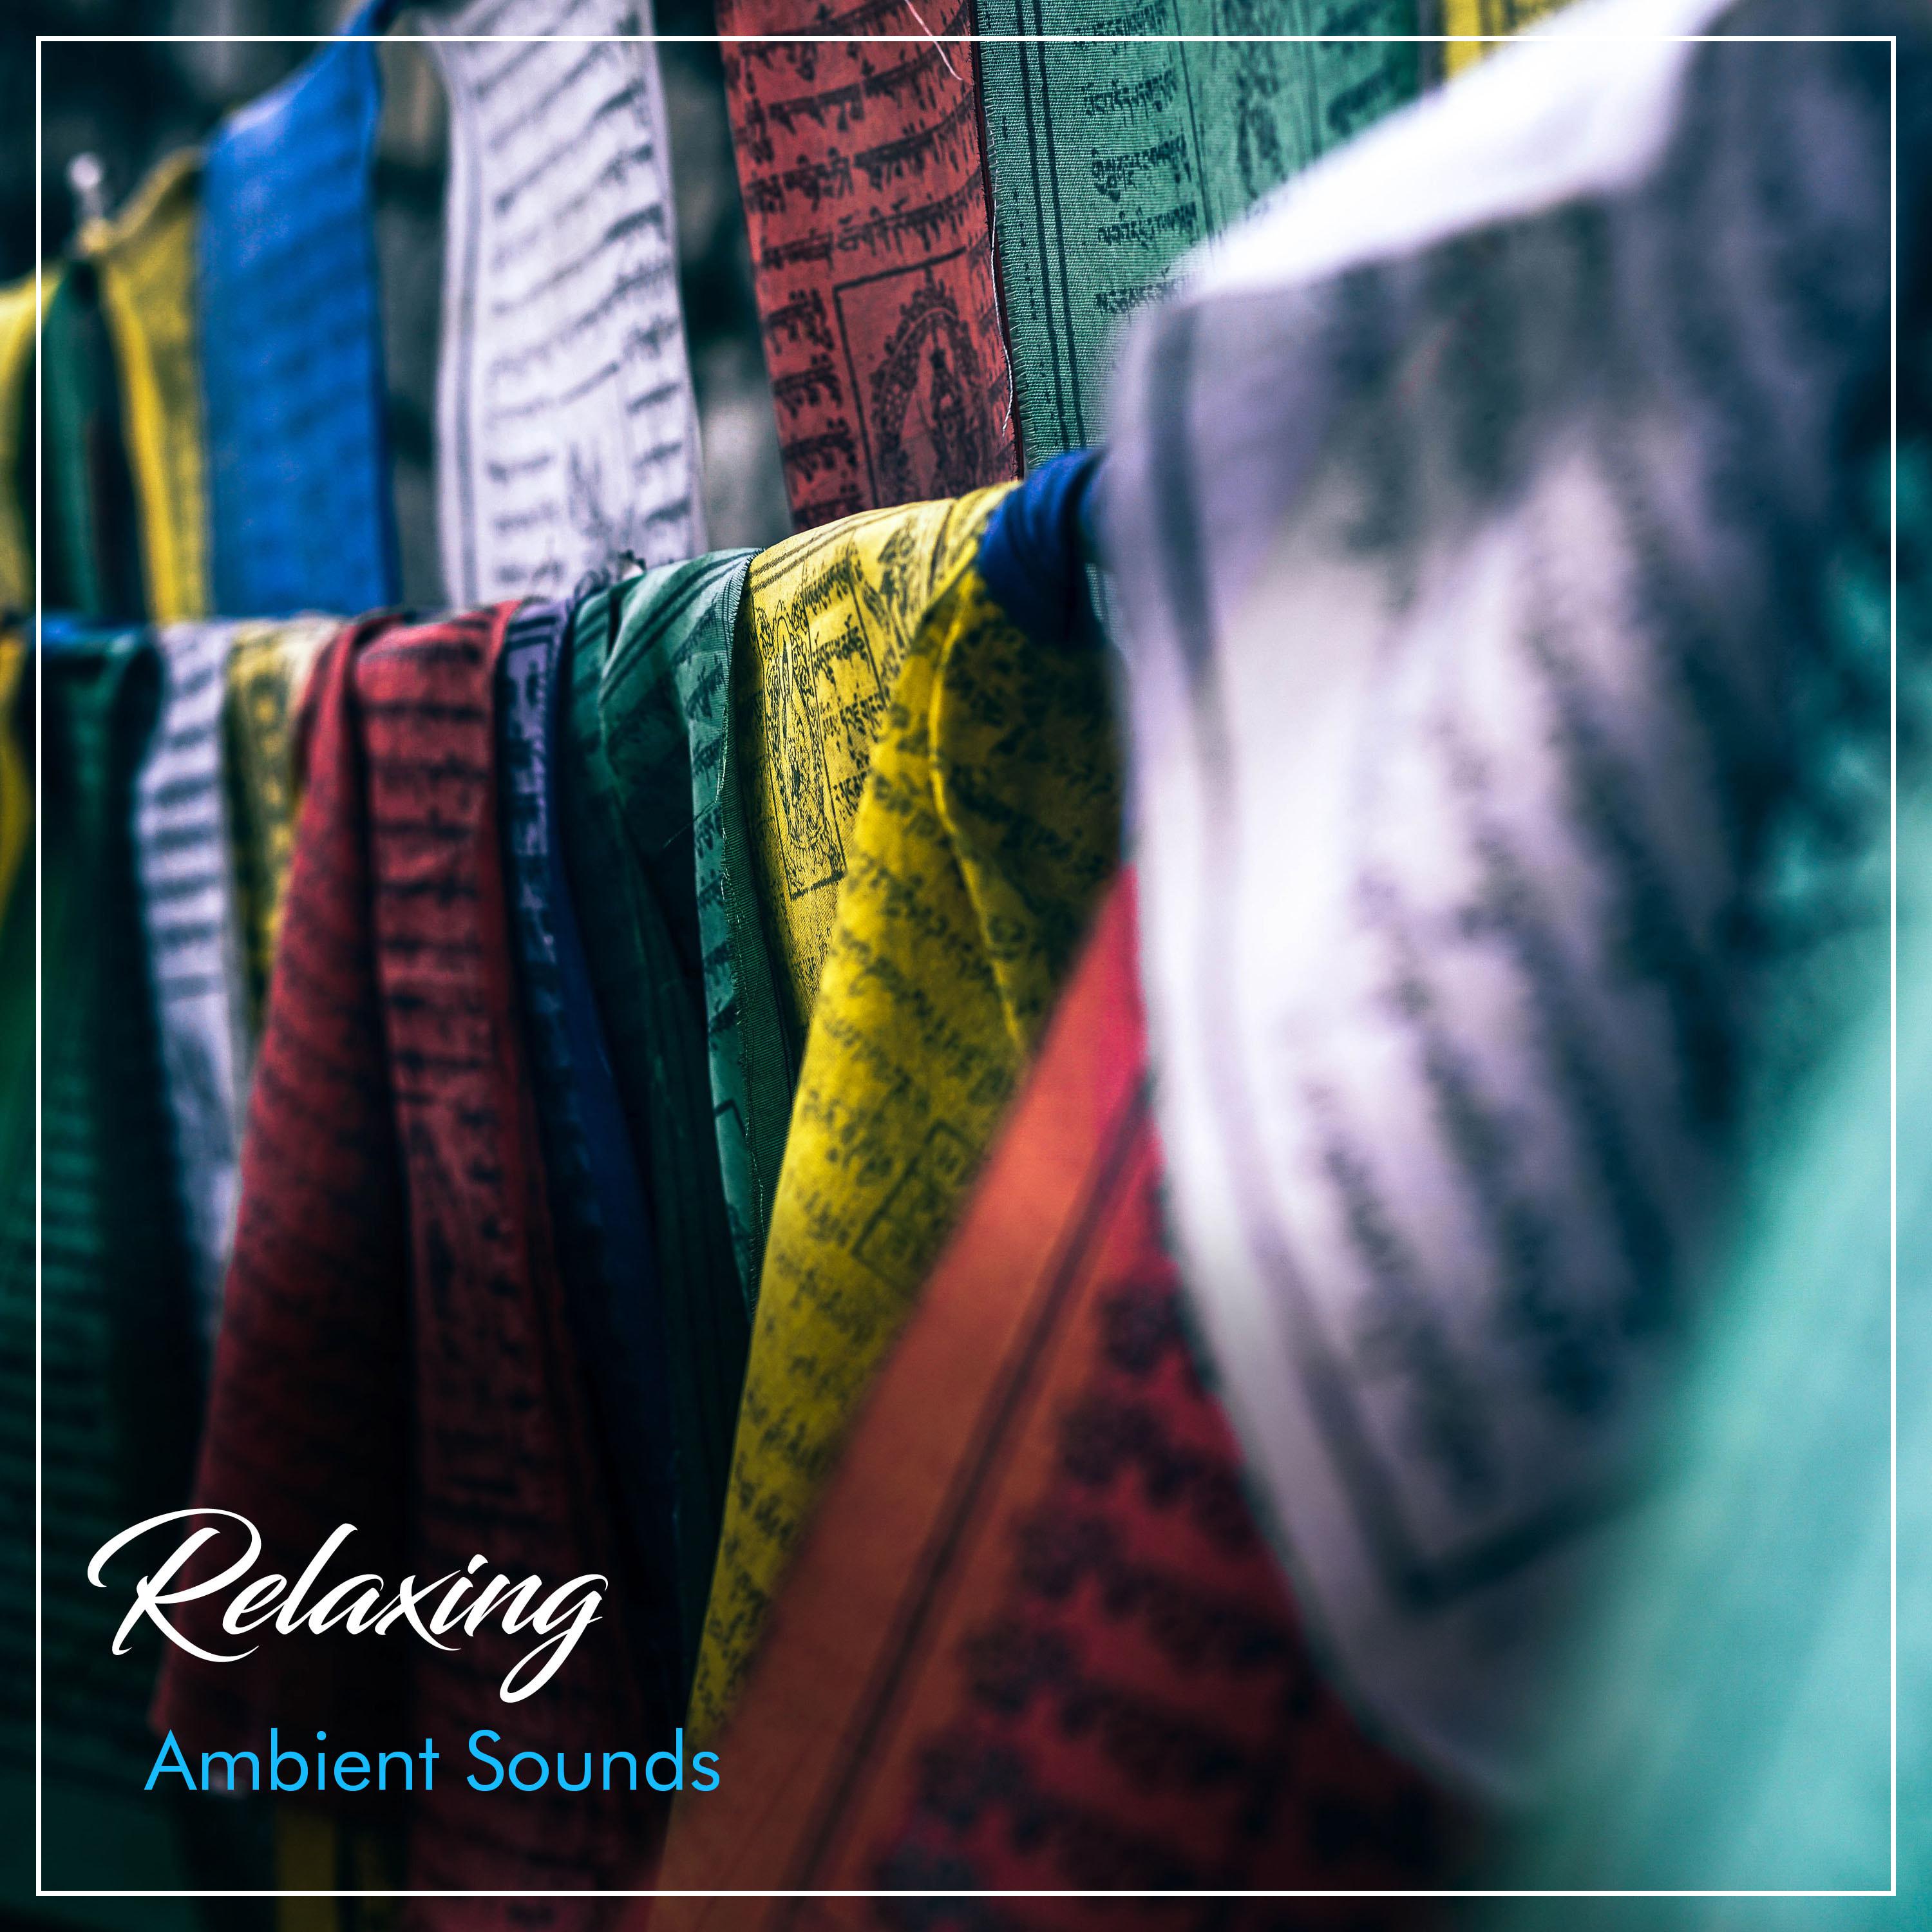 #12 Relaxing, Ambient Sounds to Free the Soul